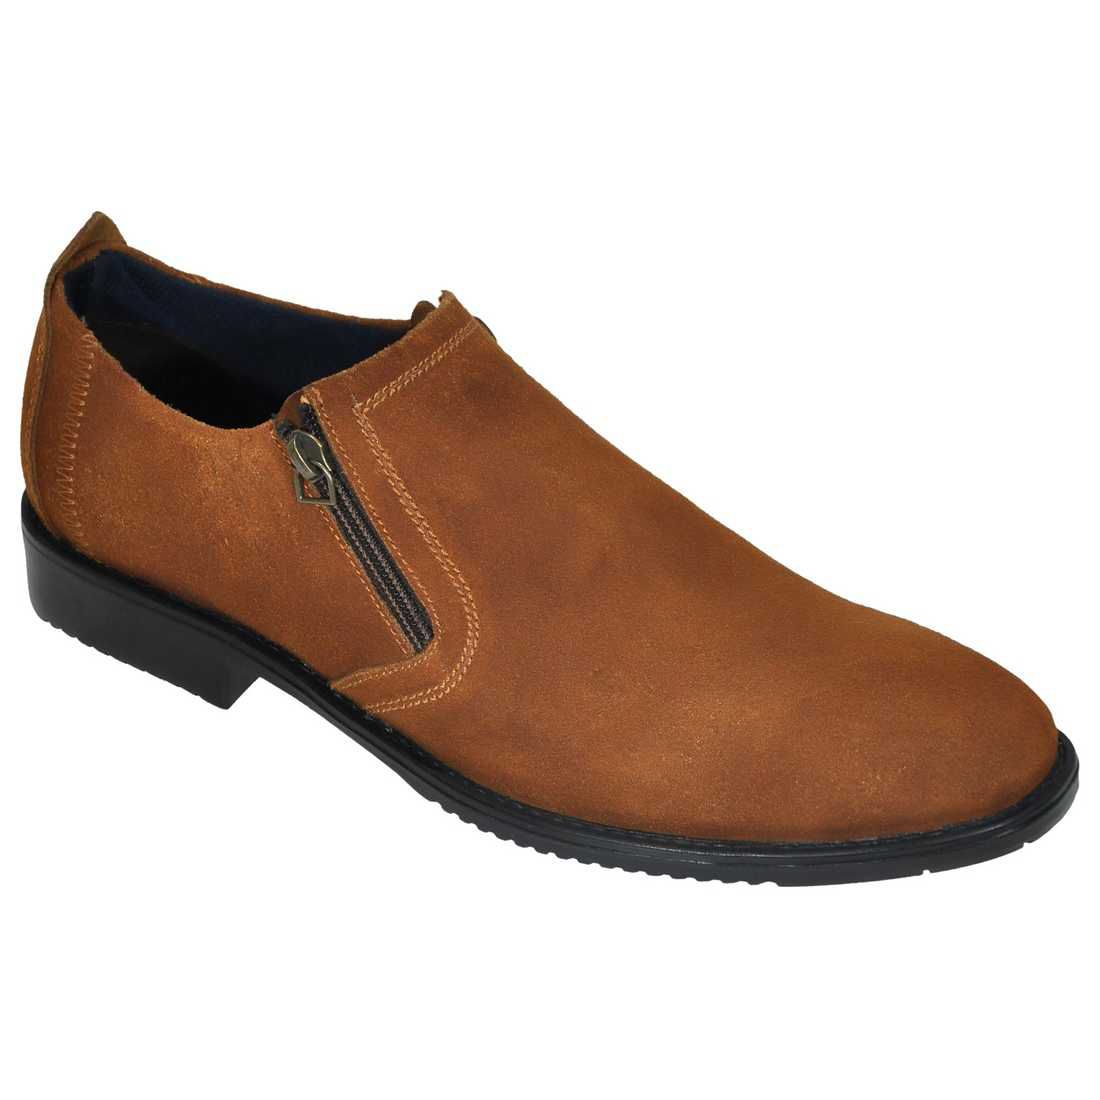 OHM New York Suede American Lifestyle Plain Toe Zip Closure Slip-on Leather Shoes